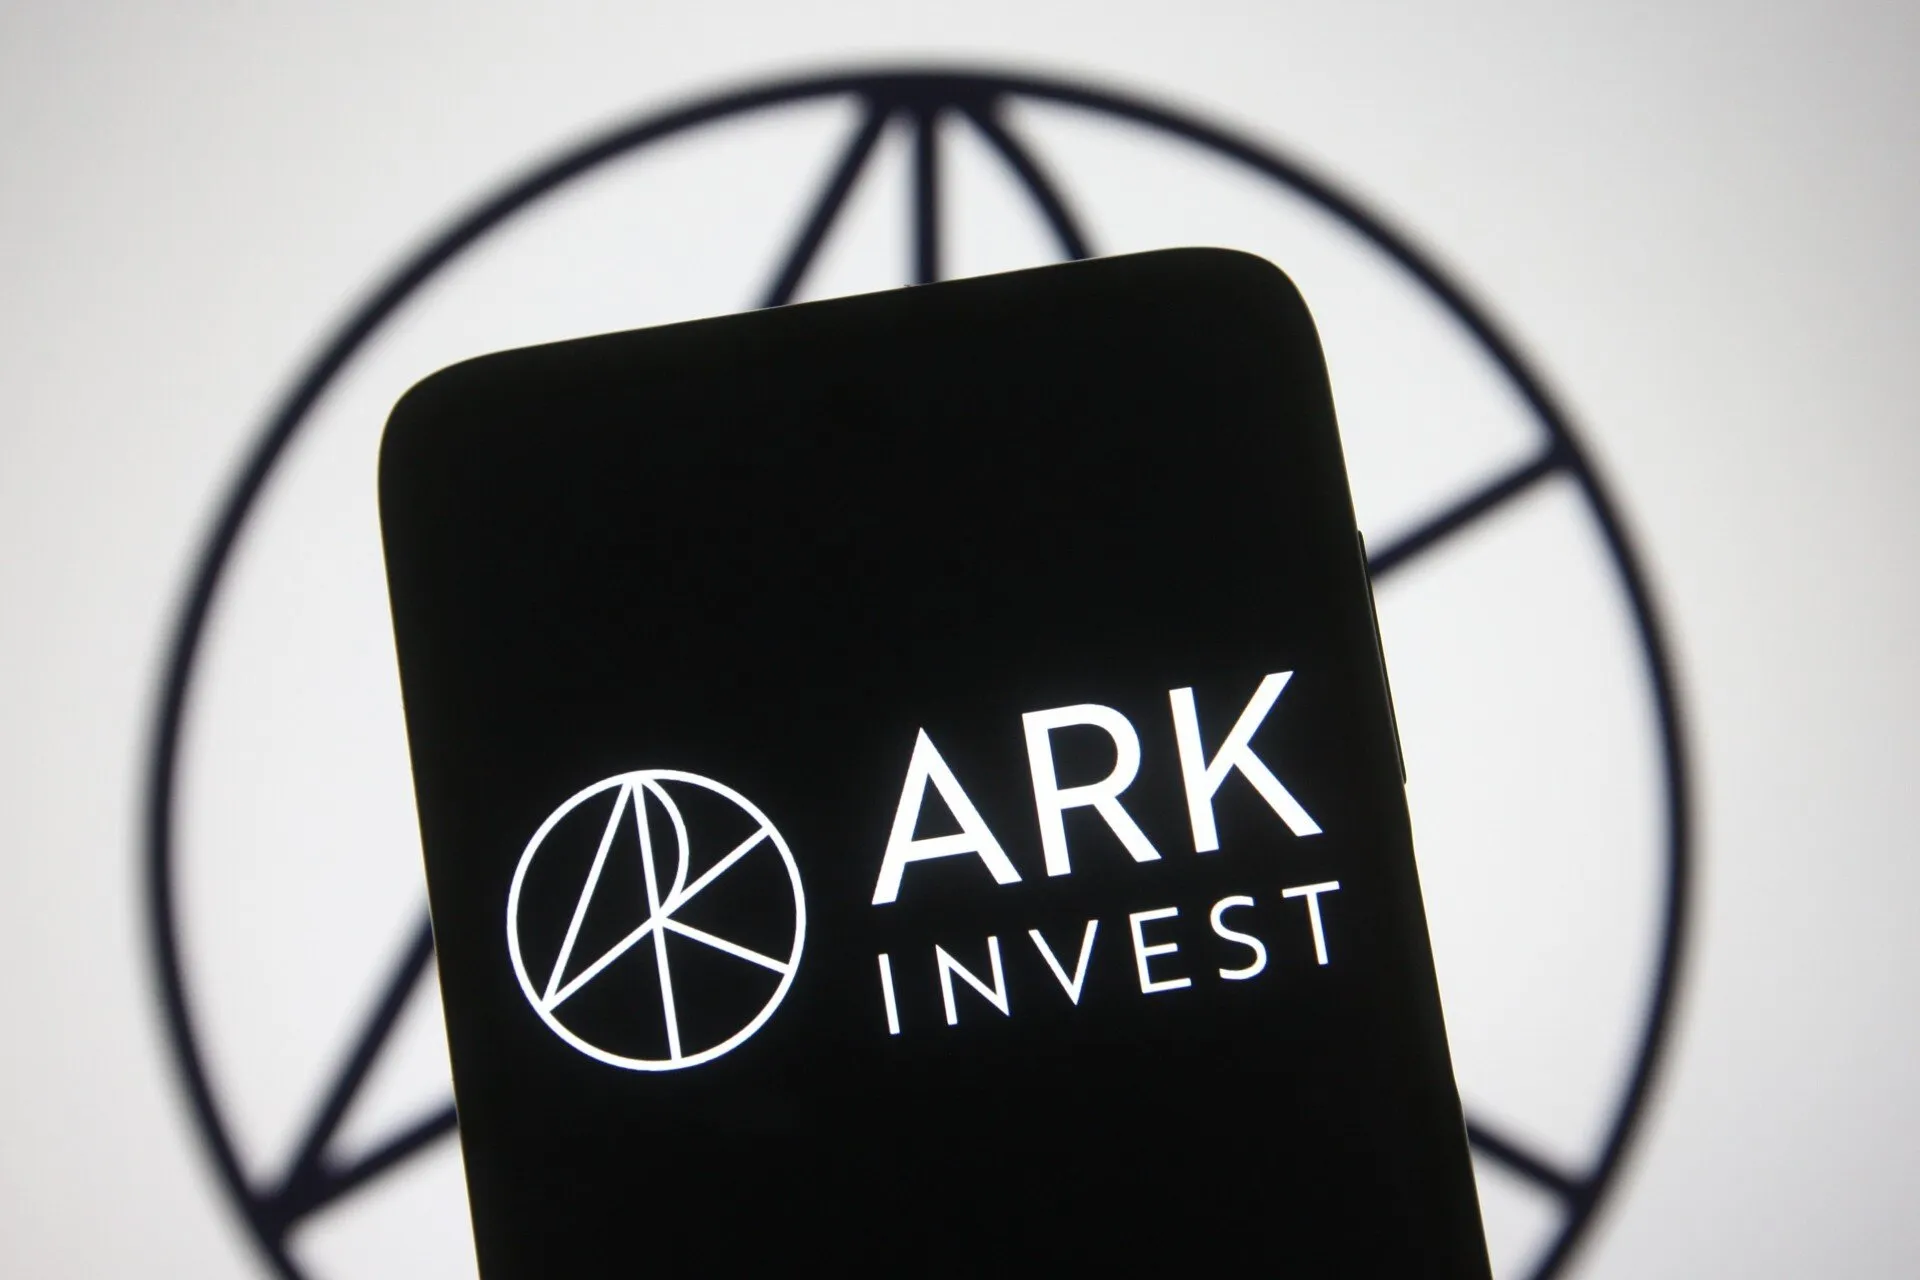 ARK focuses on investments in disruptive innovation. Image: Shutterstock.